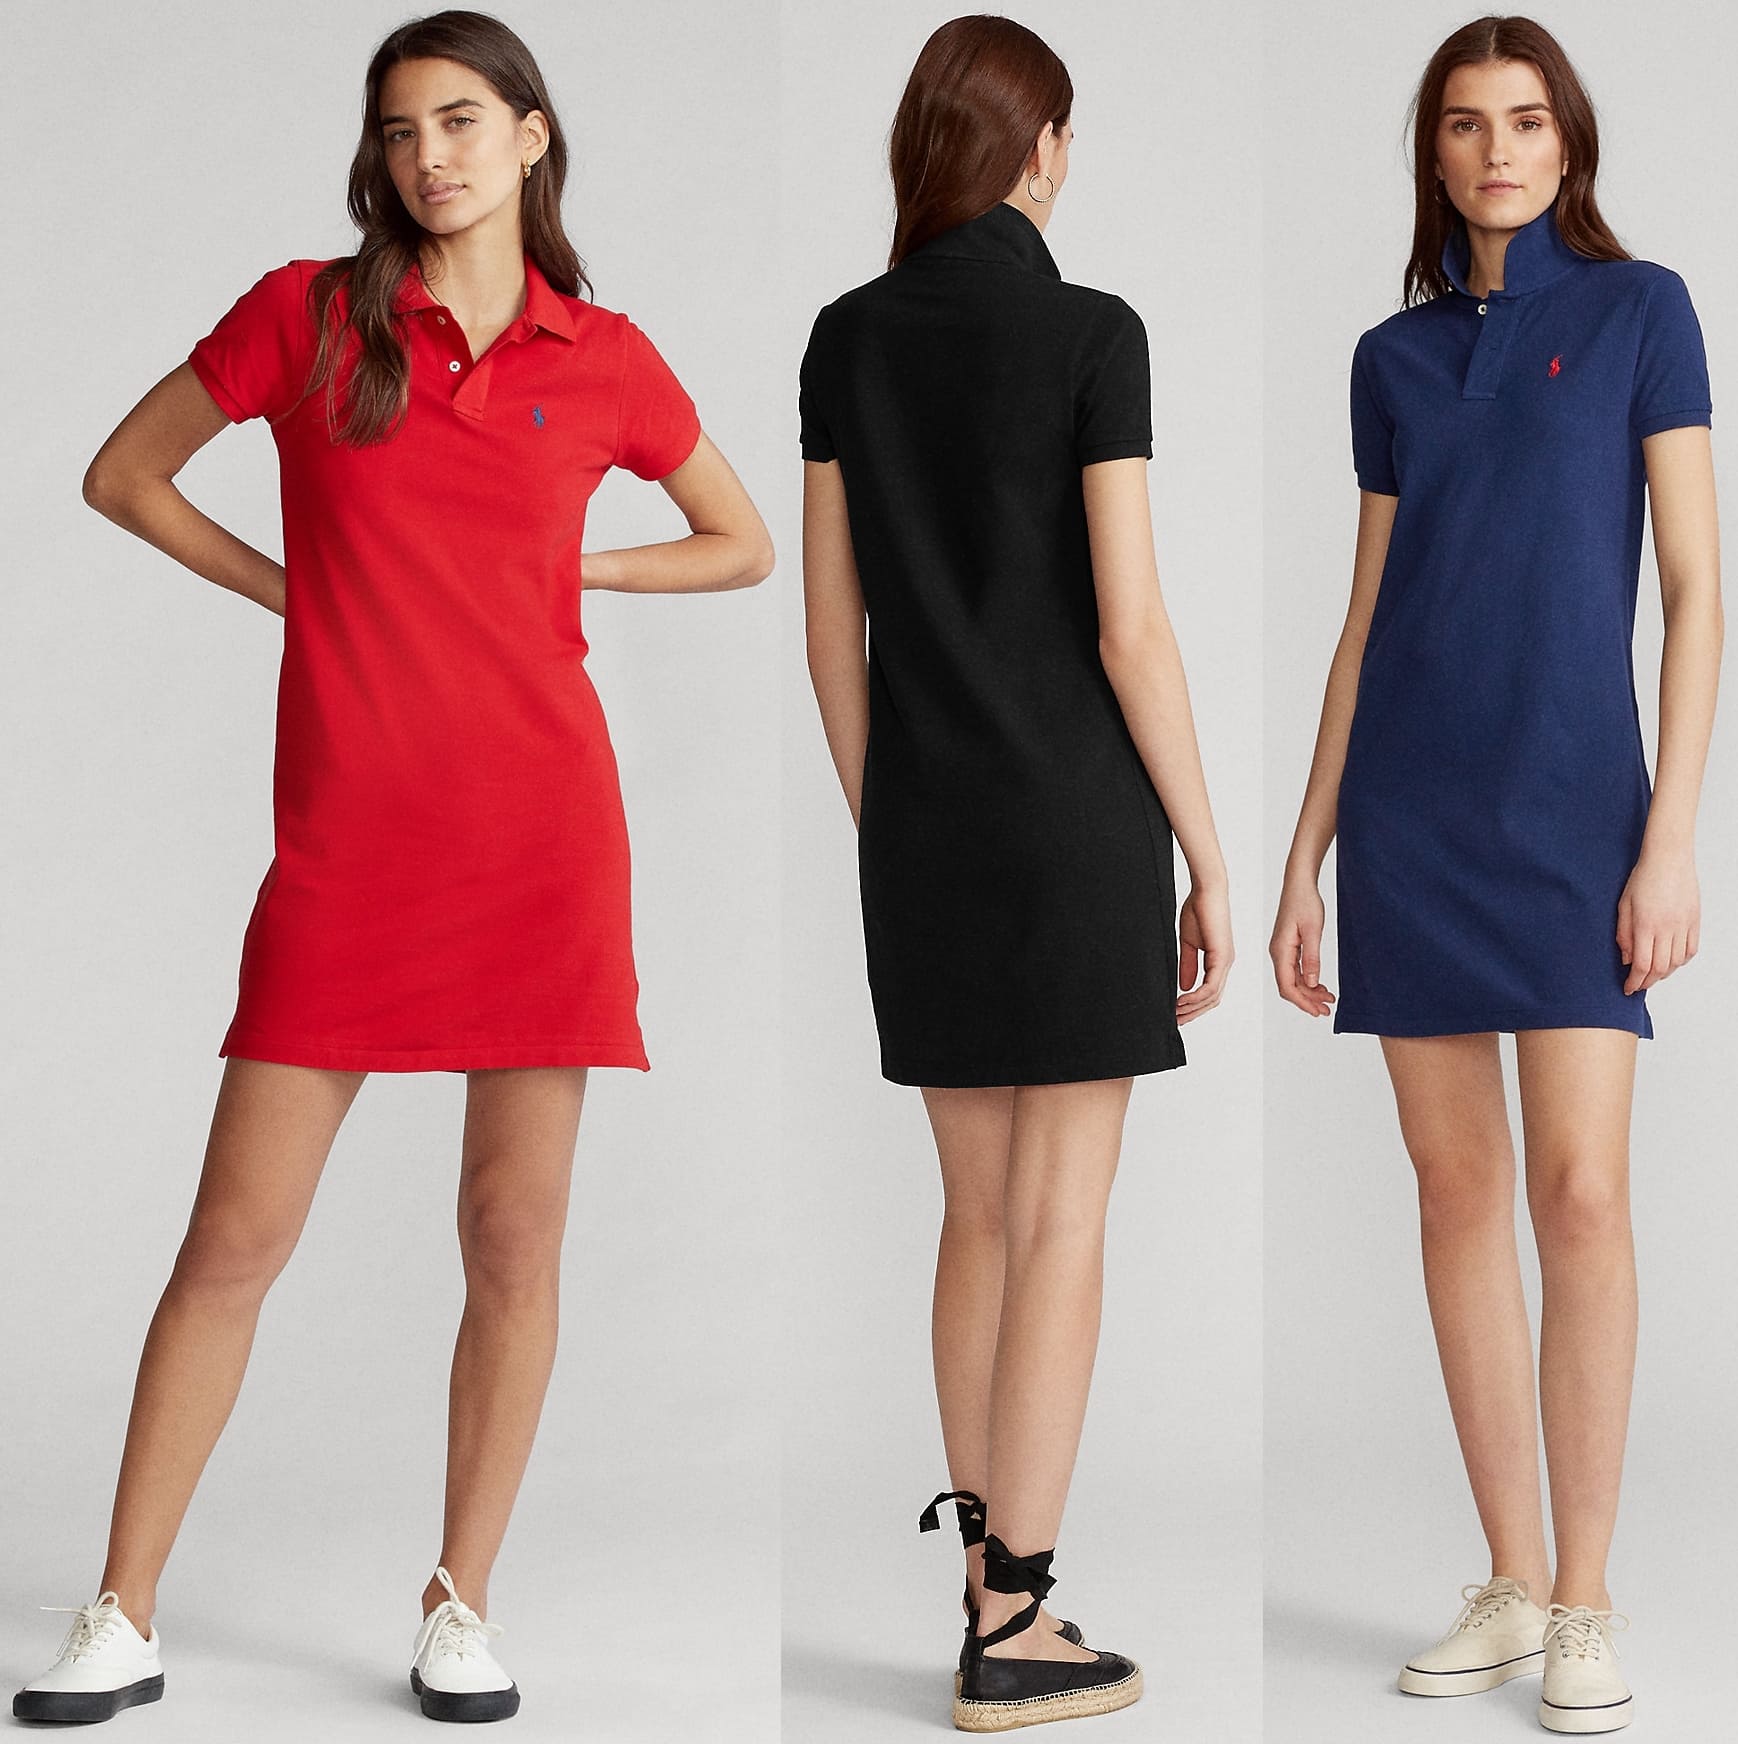 Ralph Lauren's iconic Polo shirt is reimagined for the season as a dress, cut from the same breathable cotton and finished with our signature embroidered Pony at the chest